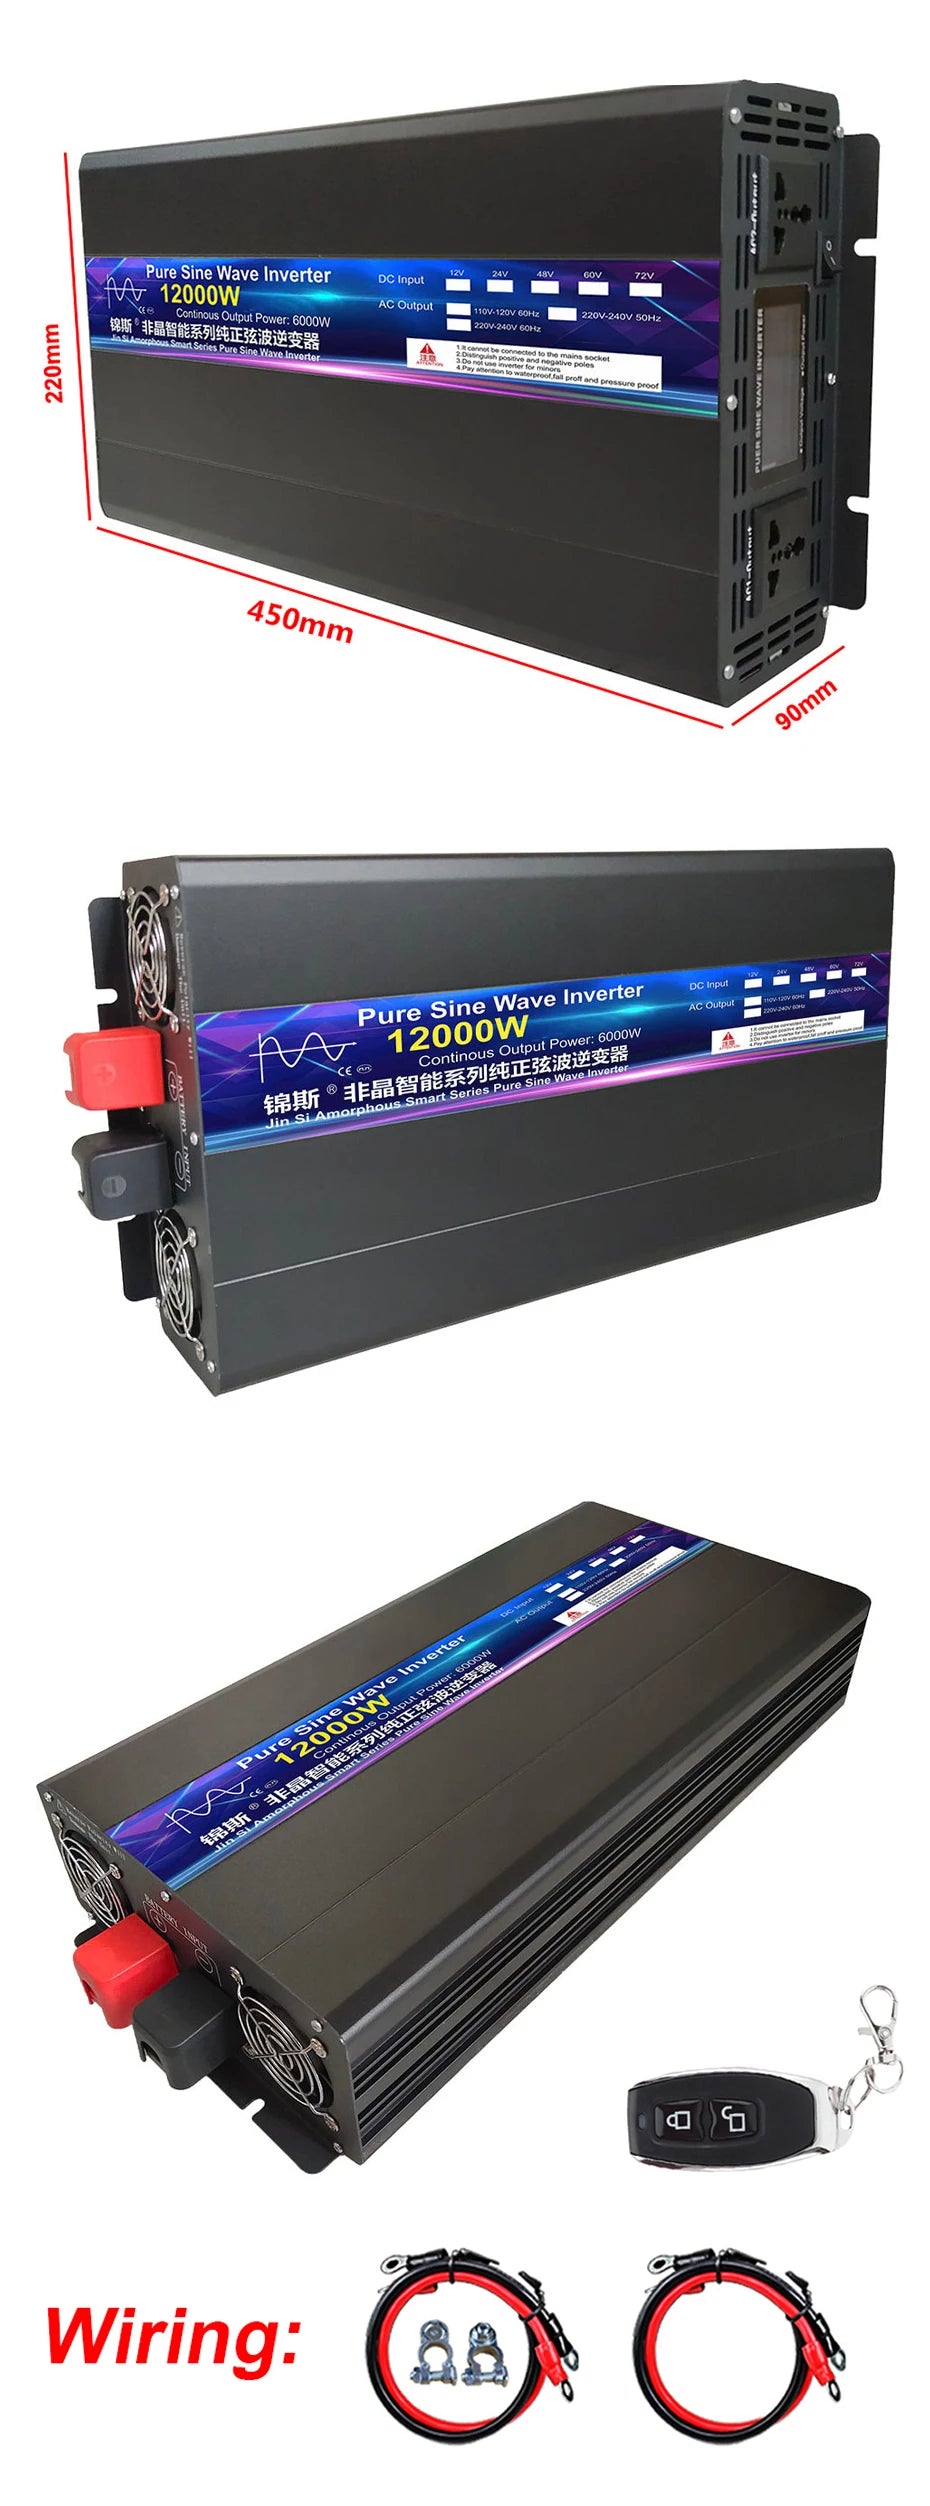 Pure sine wave inverter converts solar power to AC, suitable for 220V applications up to 12kW.